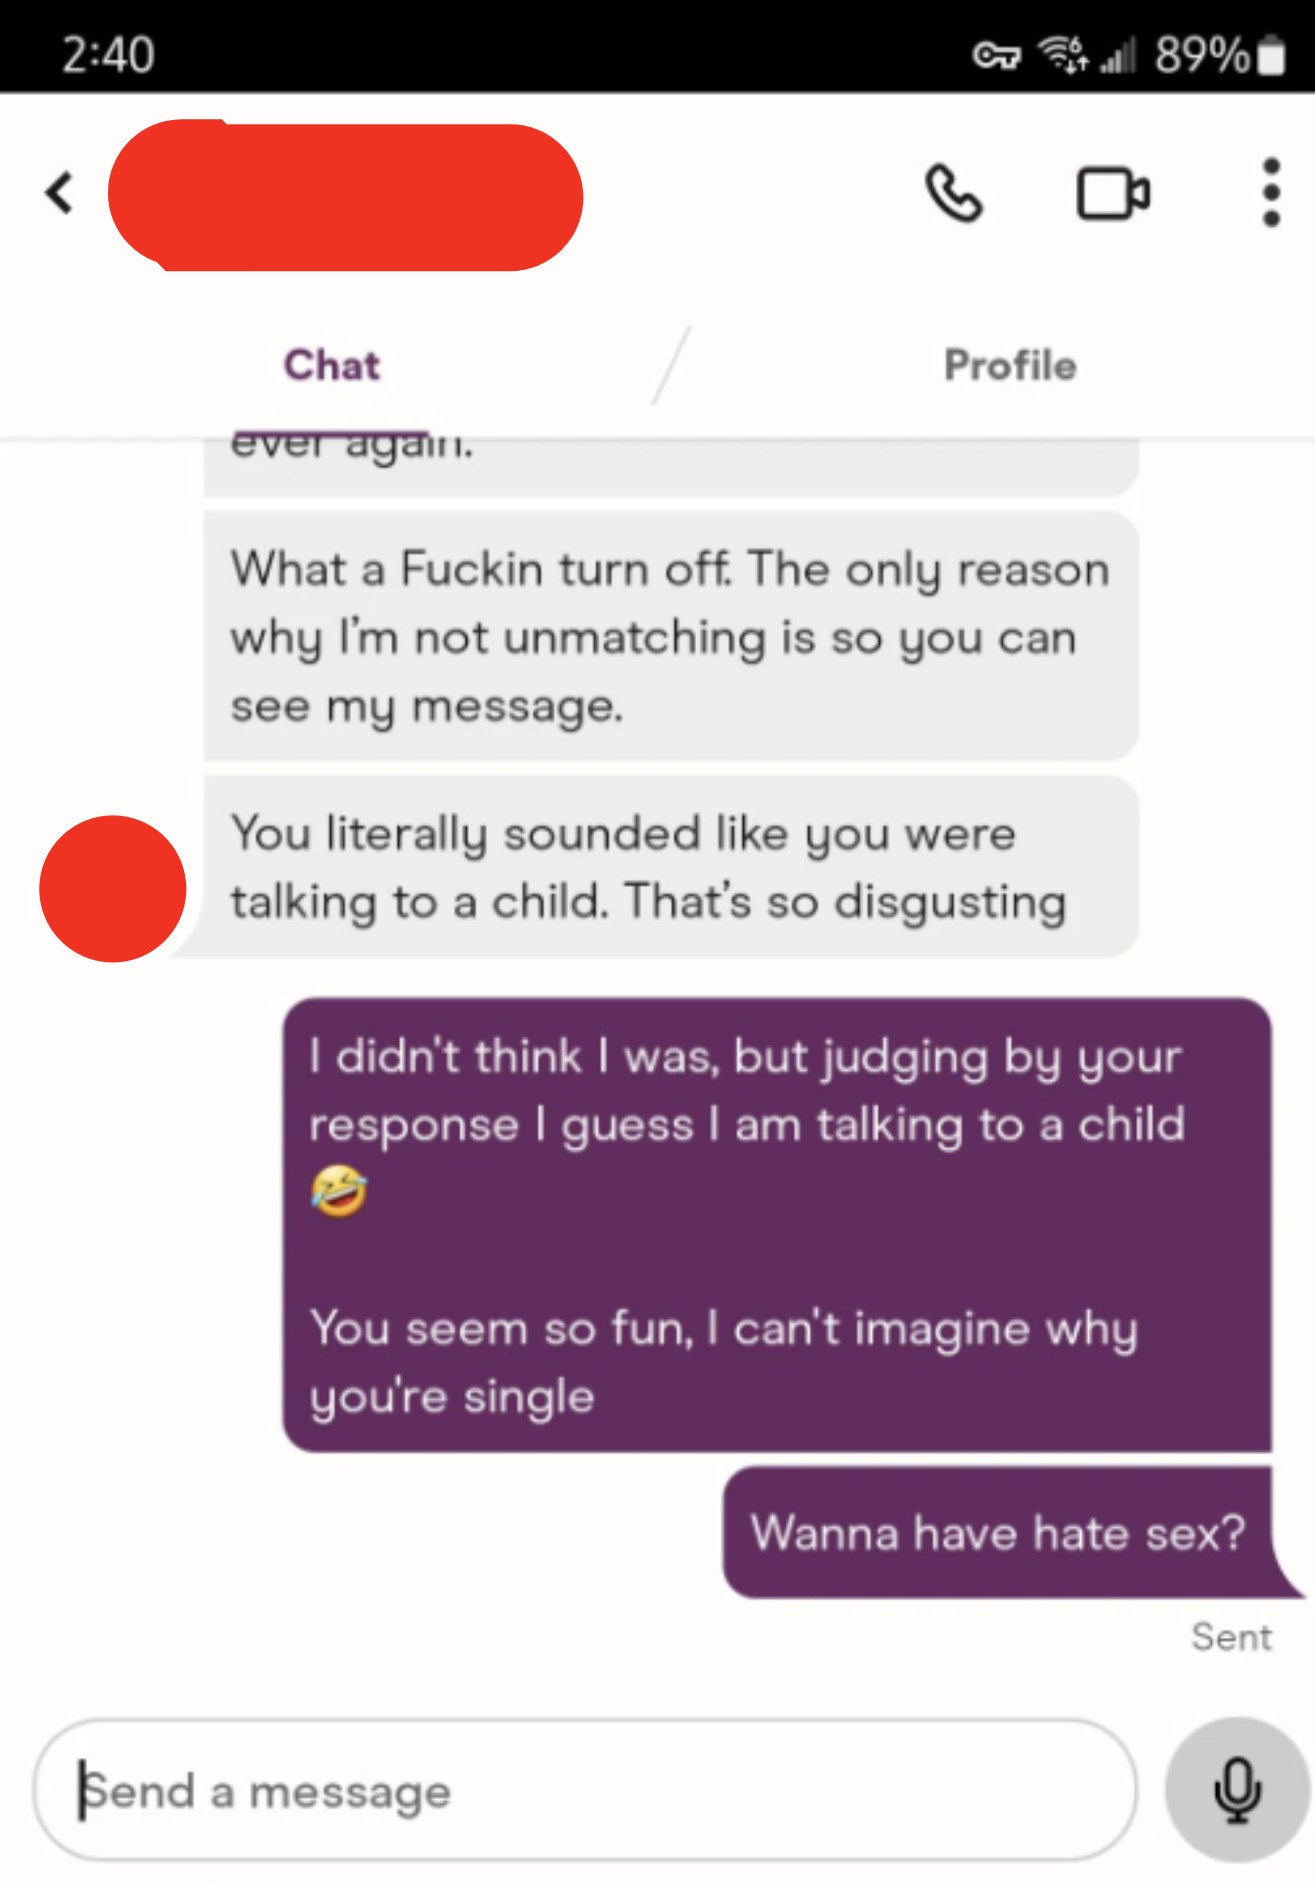 person 2 going on to say being called cute was such a turn off that it sounded like they were talking to a child and only keeping them matched so they could read the messages and person 1 says wanna have hate sex